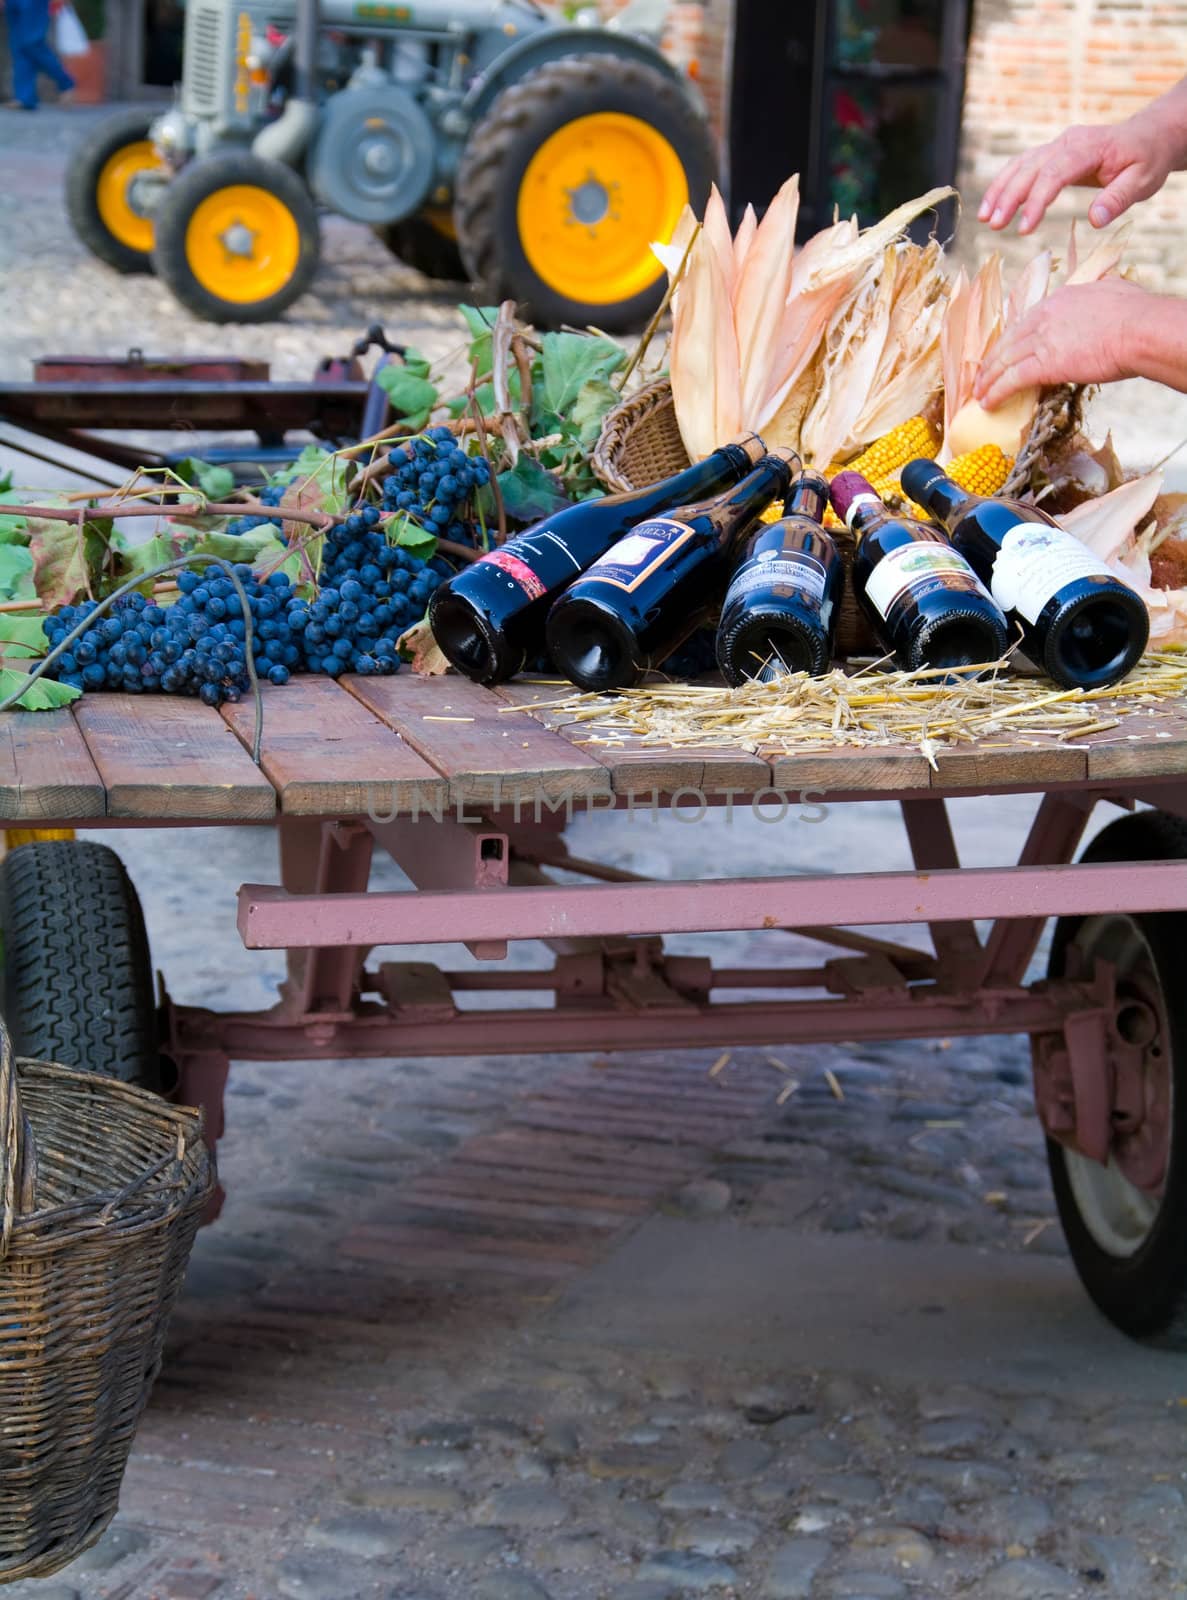 Wagon loaded with wine, grapes and blue grapes